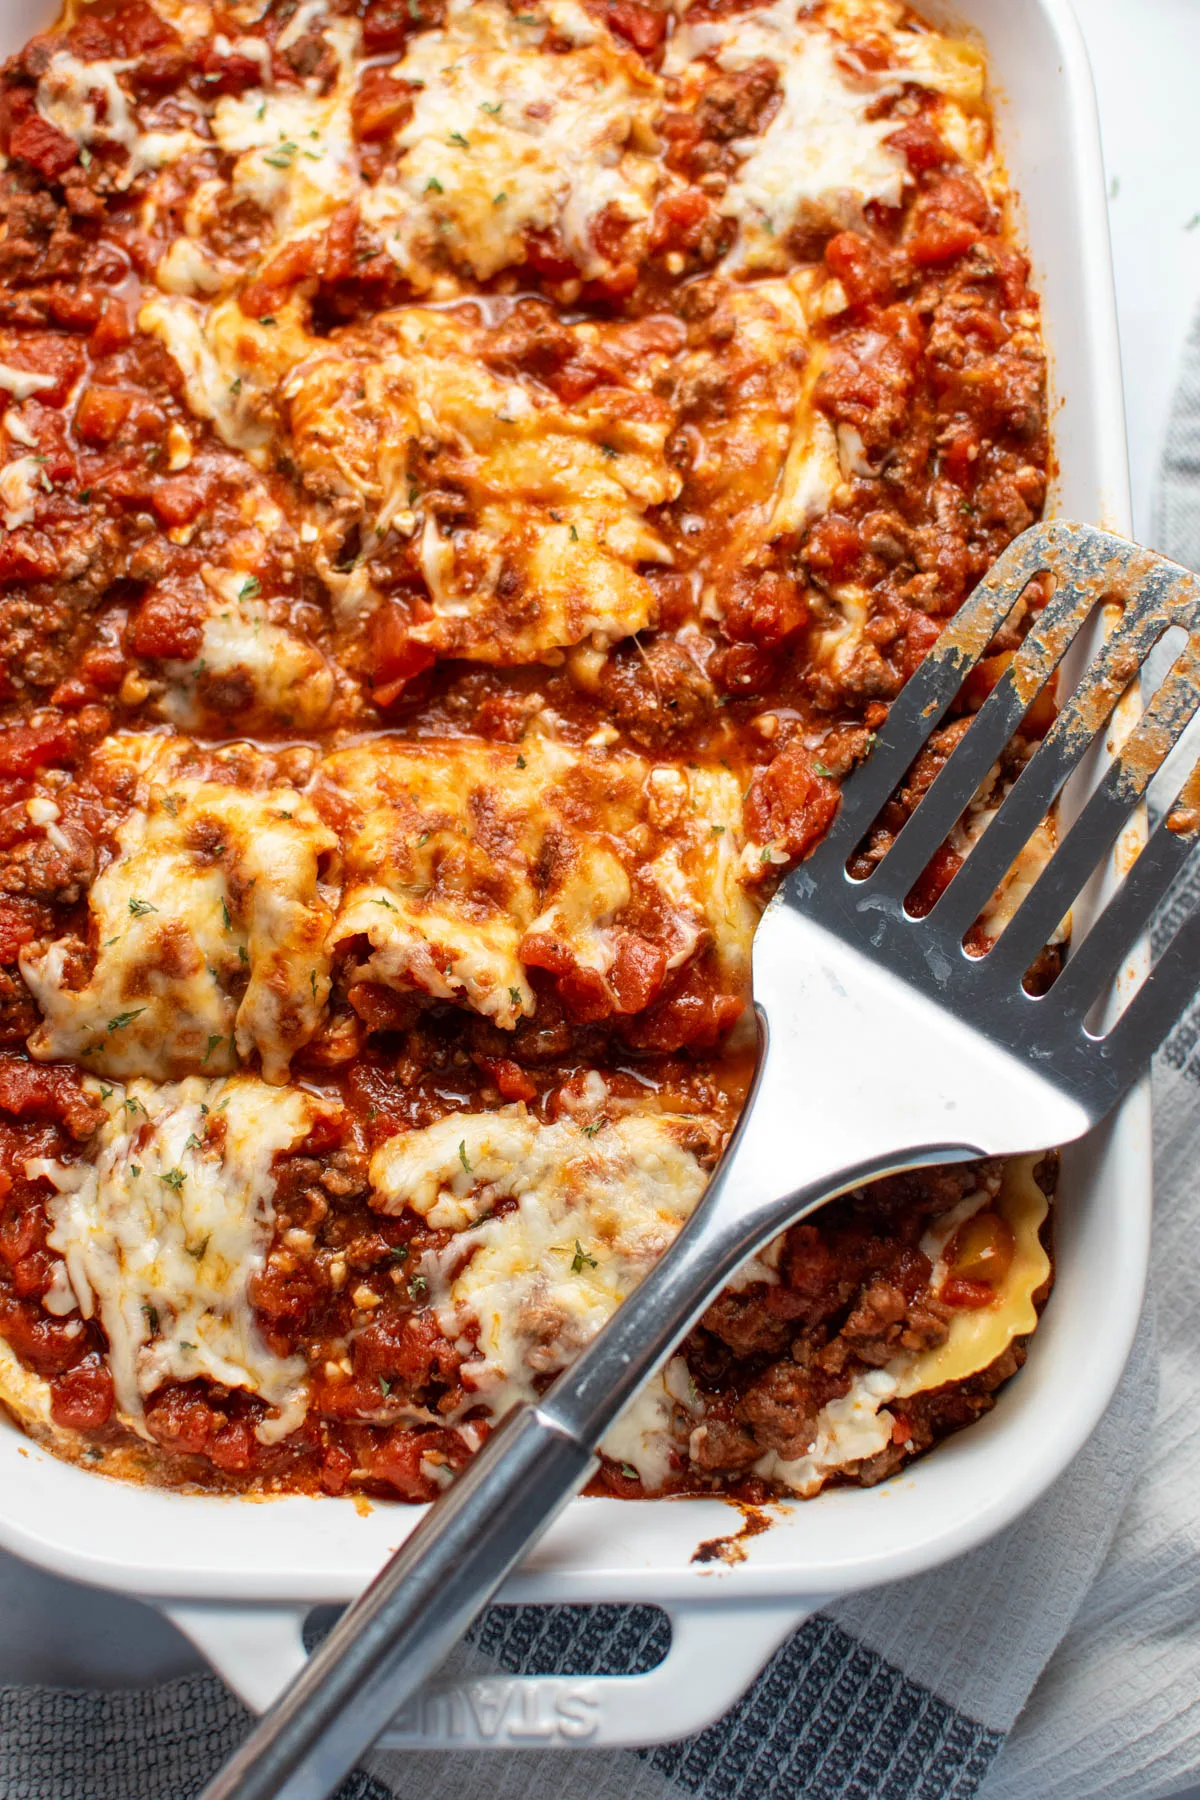 Metal spatula rests on white baking dish with cut pieces of lasagna with melted mozzarella.